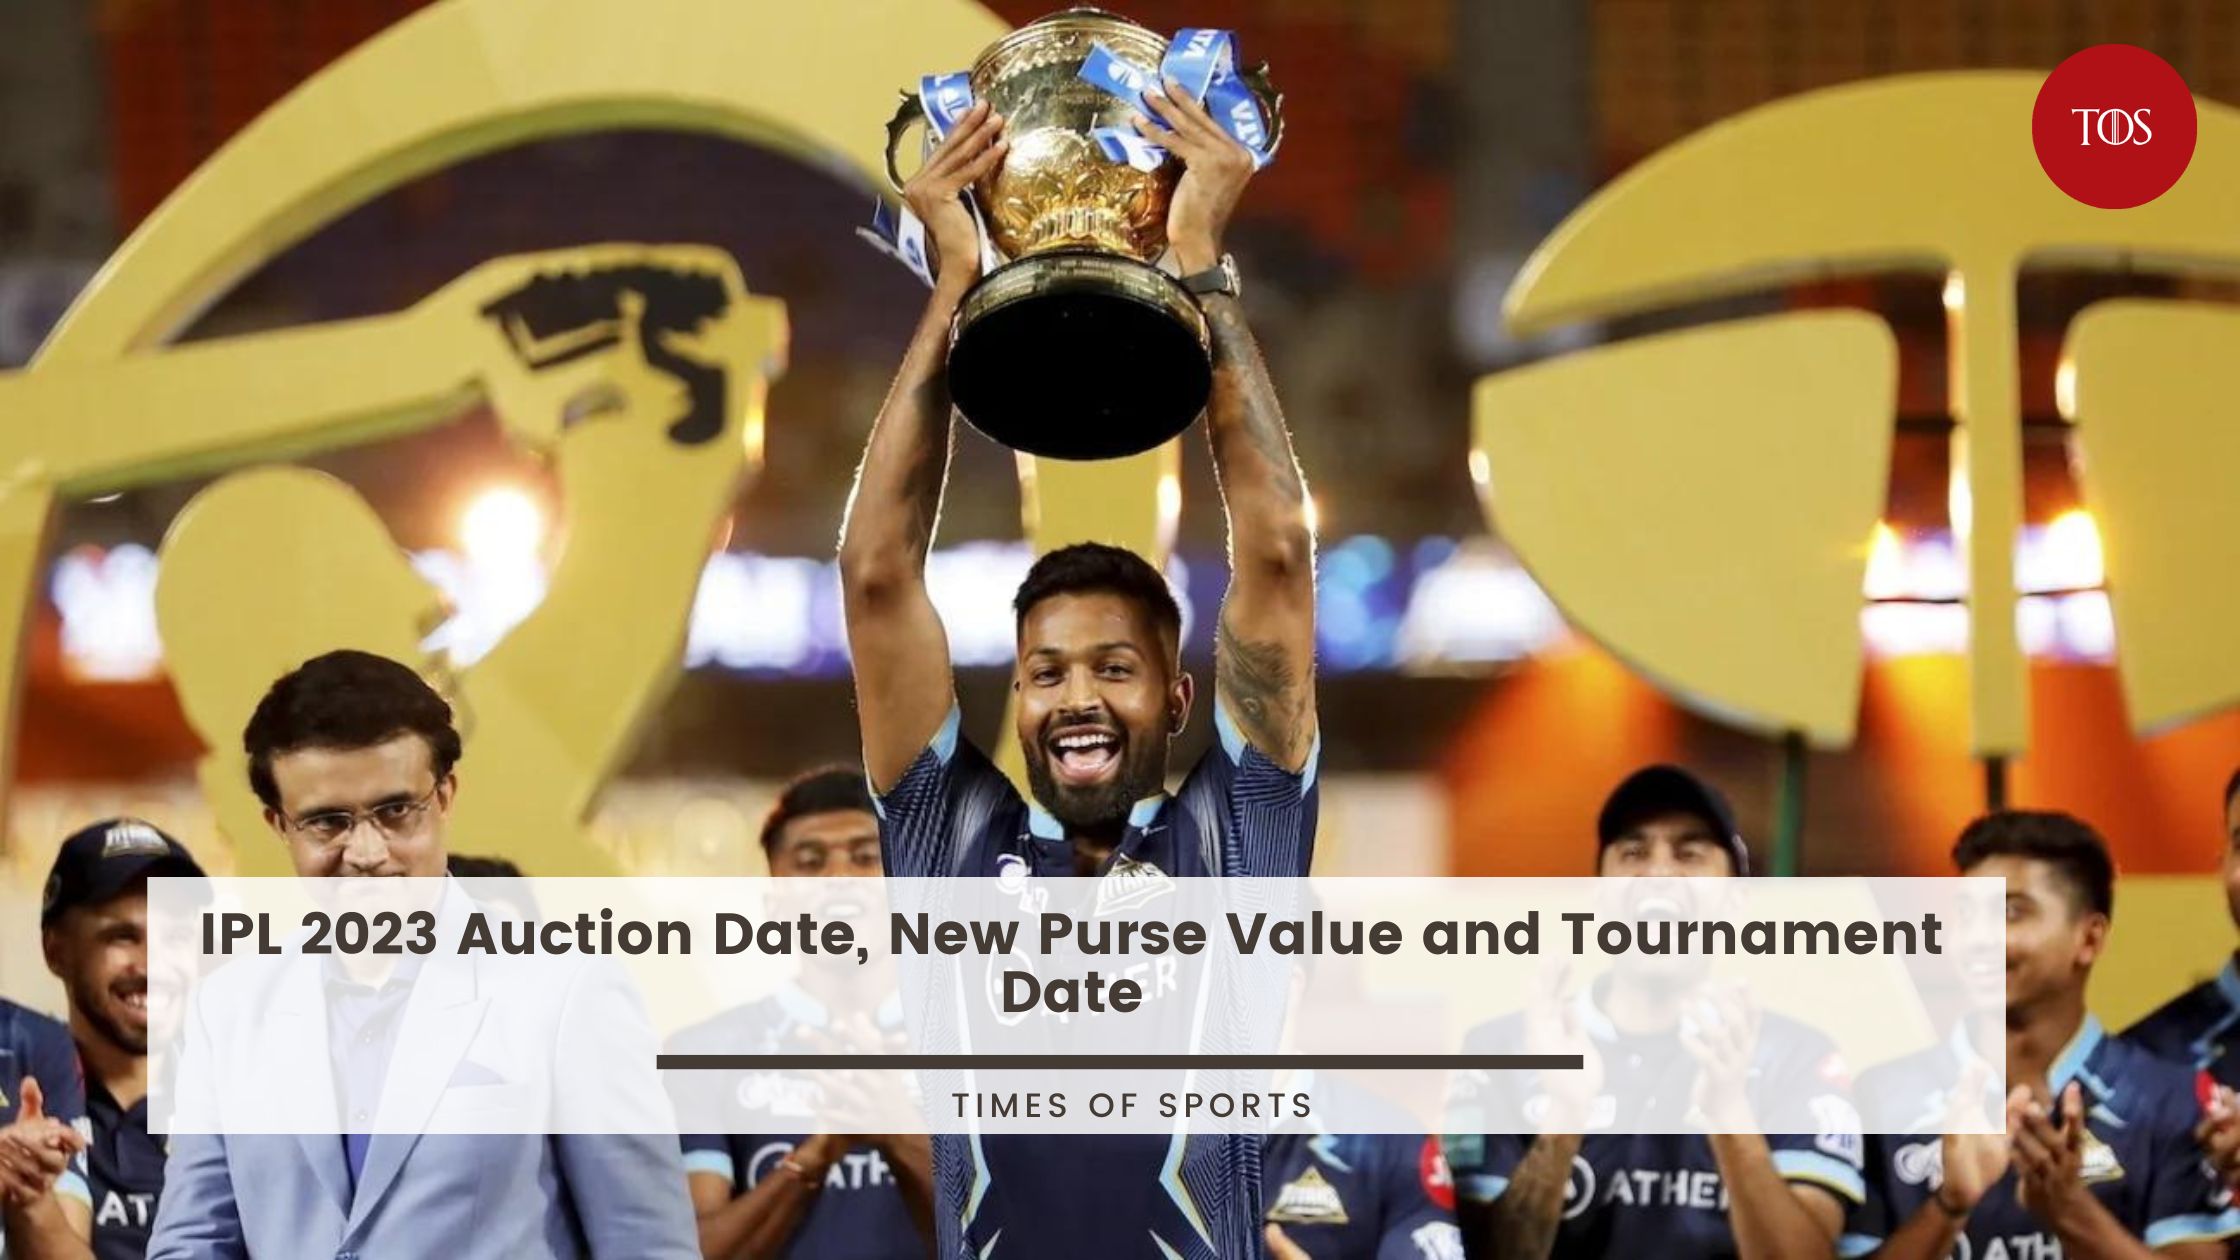 Which player has been the best and worst buy for Chennai Super Kings in the IPL  auction 2022? - Quora